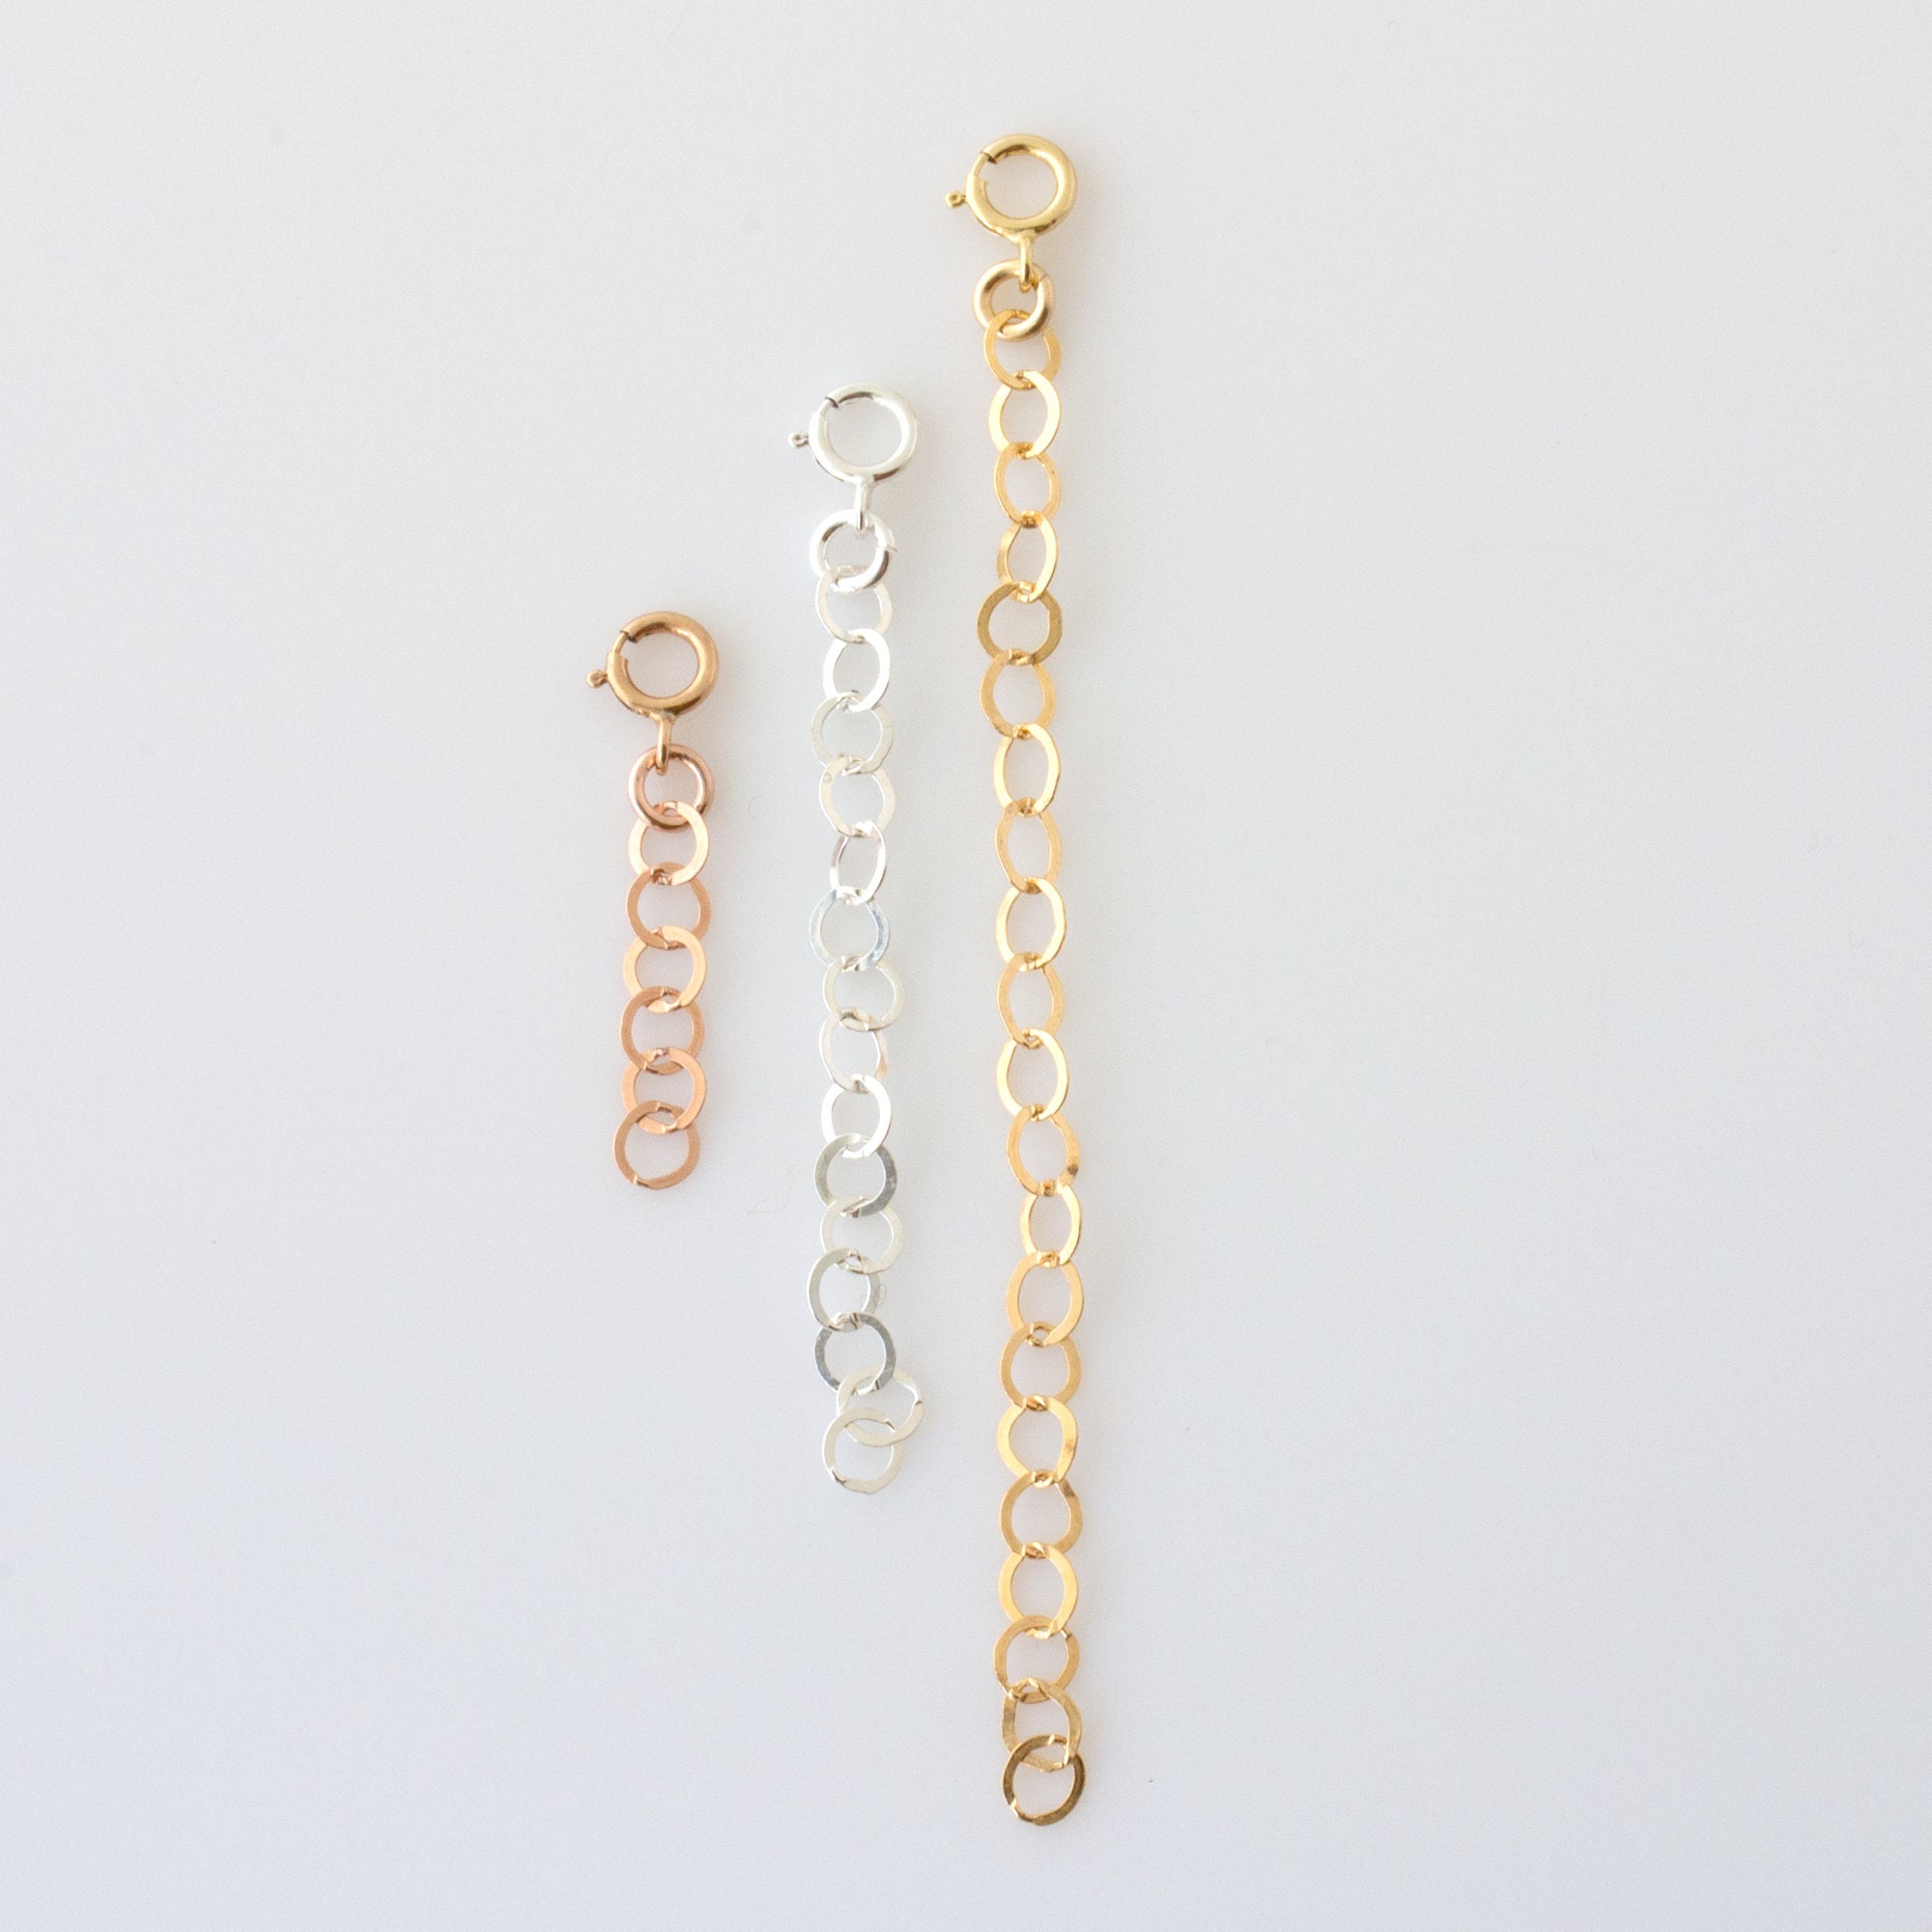 Extension chain · chain extender · chain extend · 24k gold plated brass ·  adjustable chain · extra chain